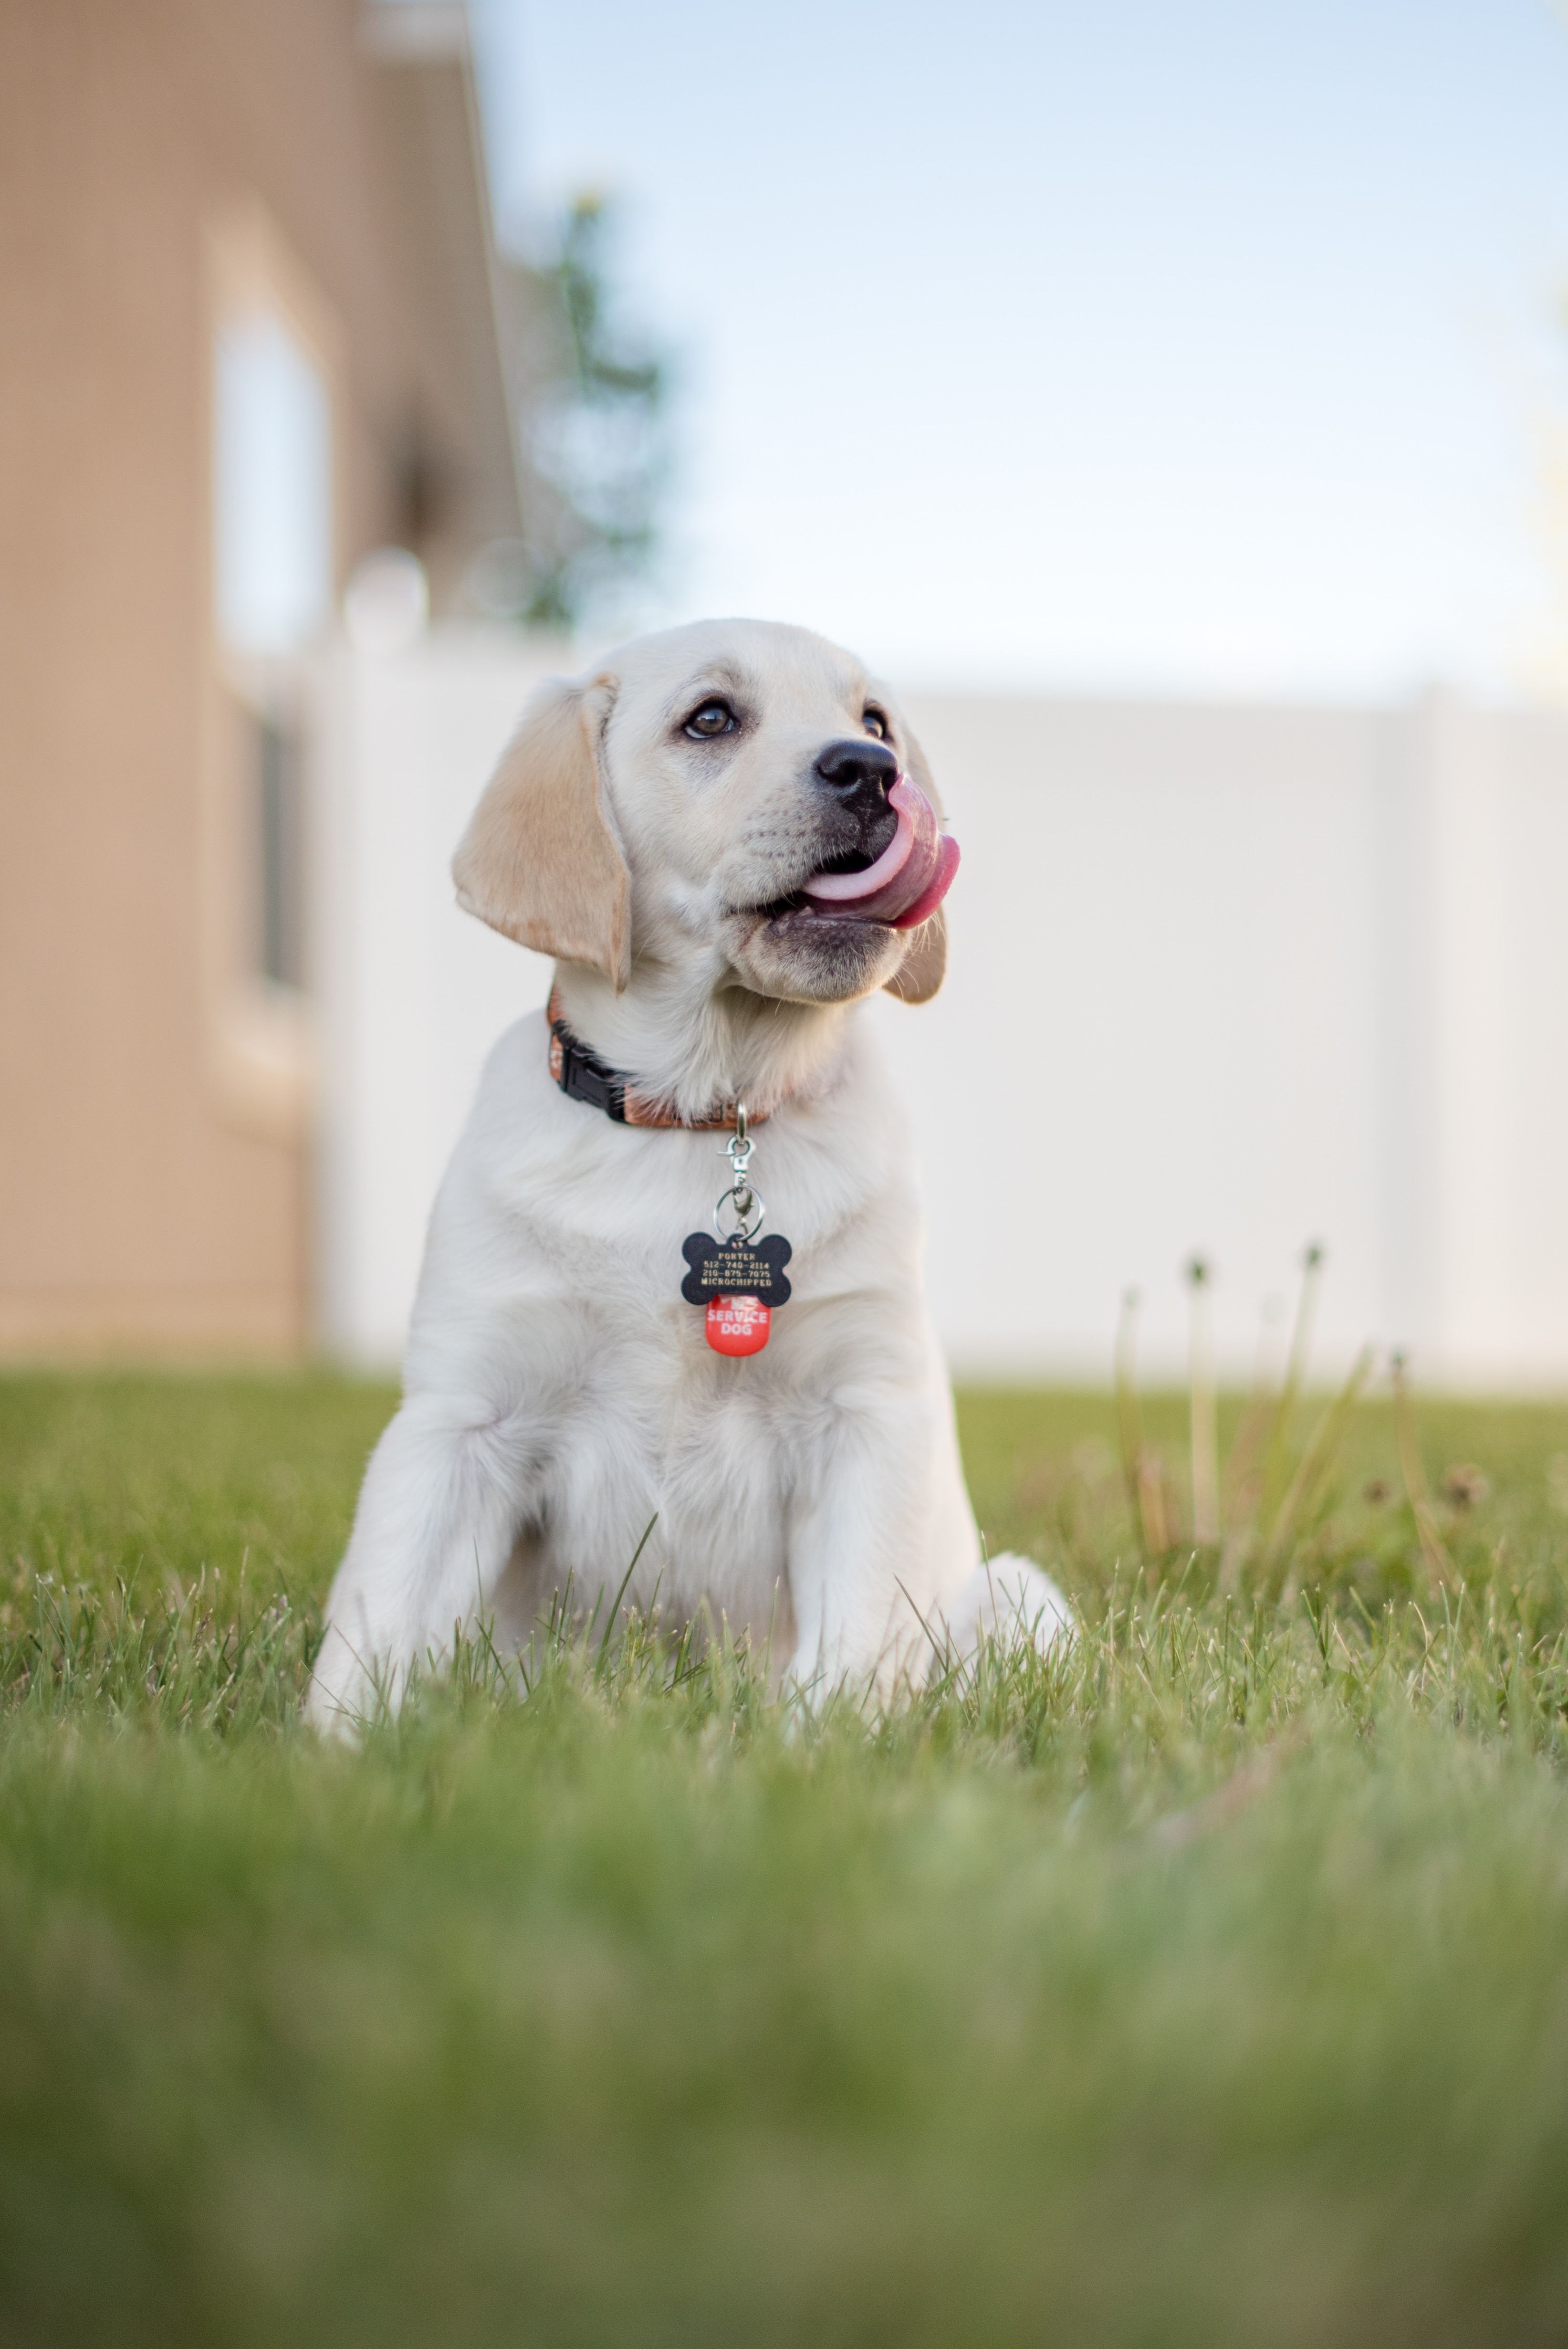 Pet therapy aids people with PTSD, stress, and burnout to heal quicker. Photo By Shane Guymon on Unsplash